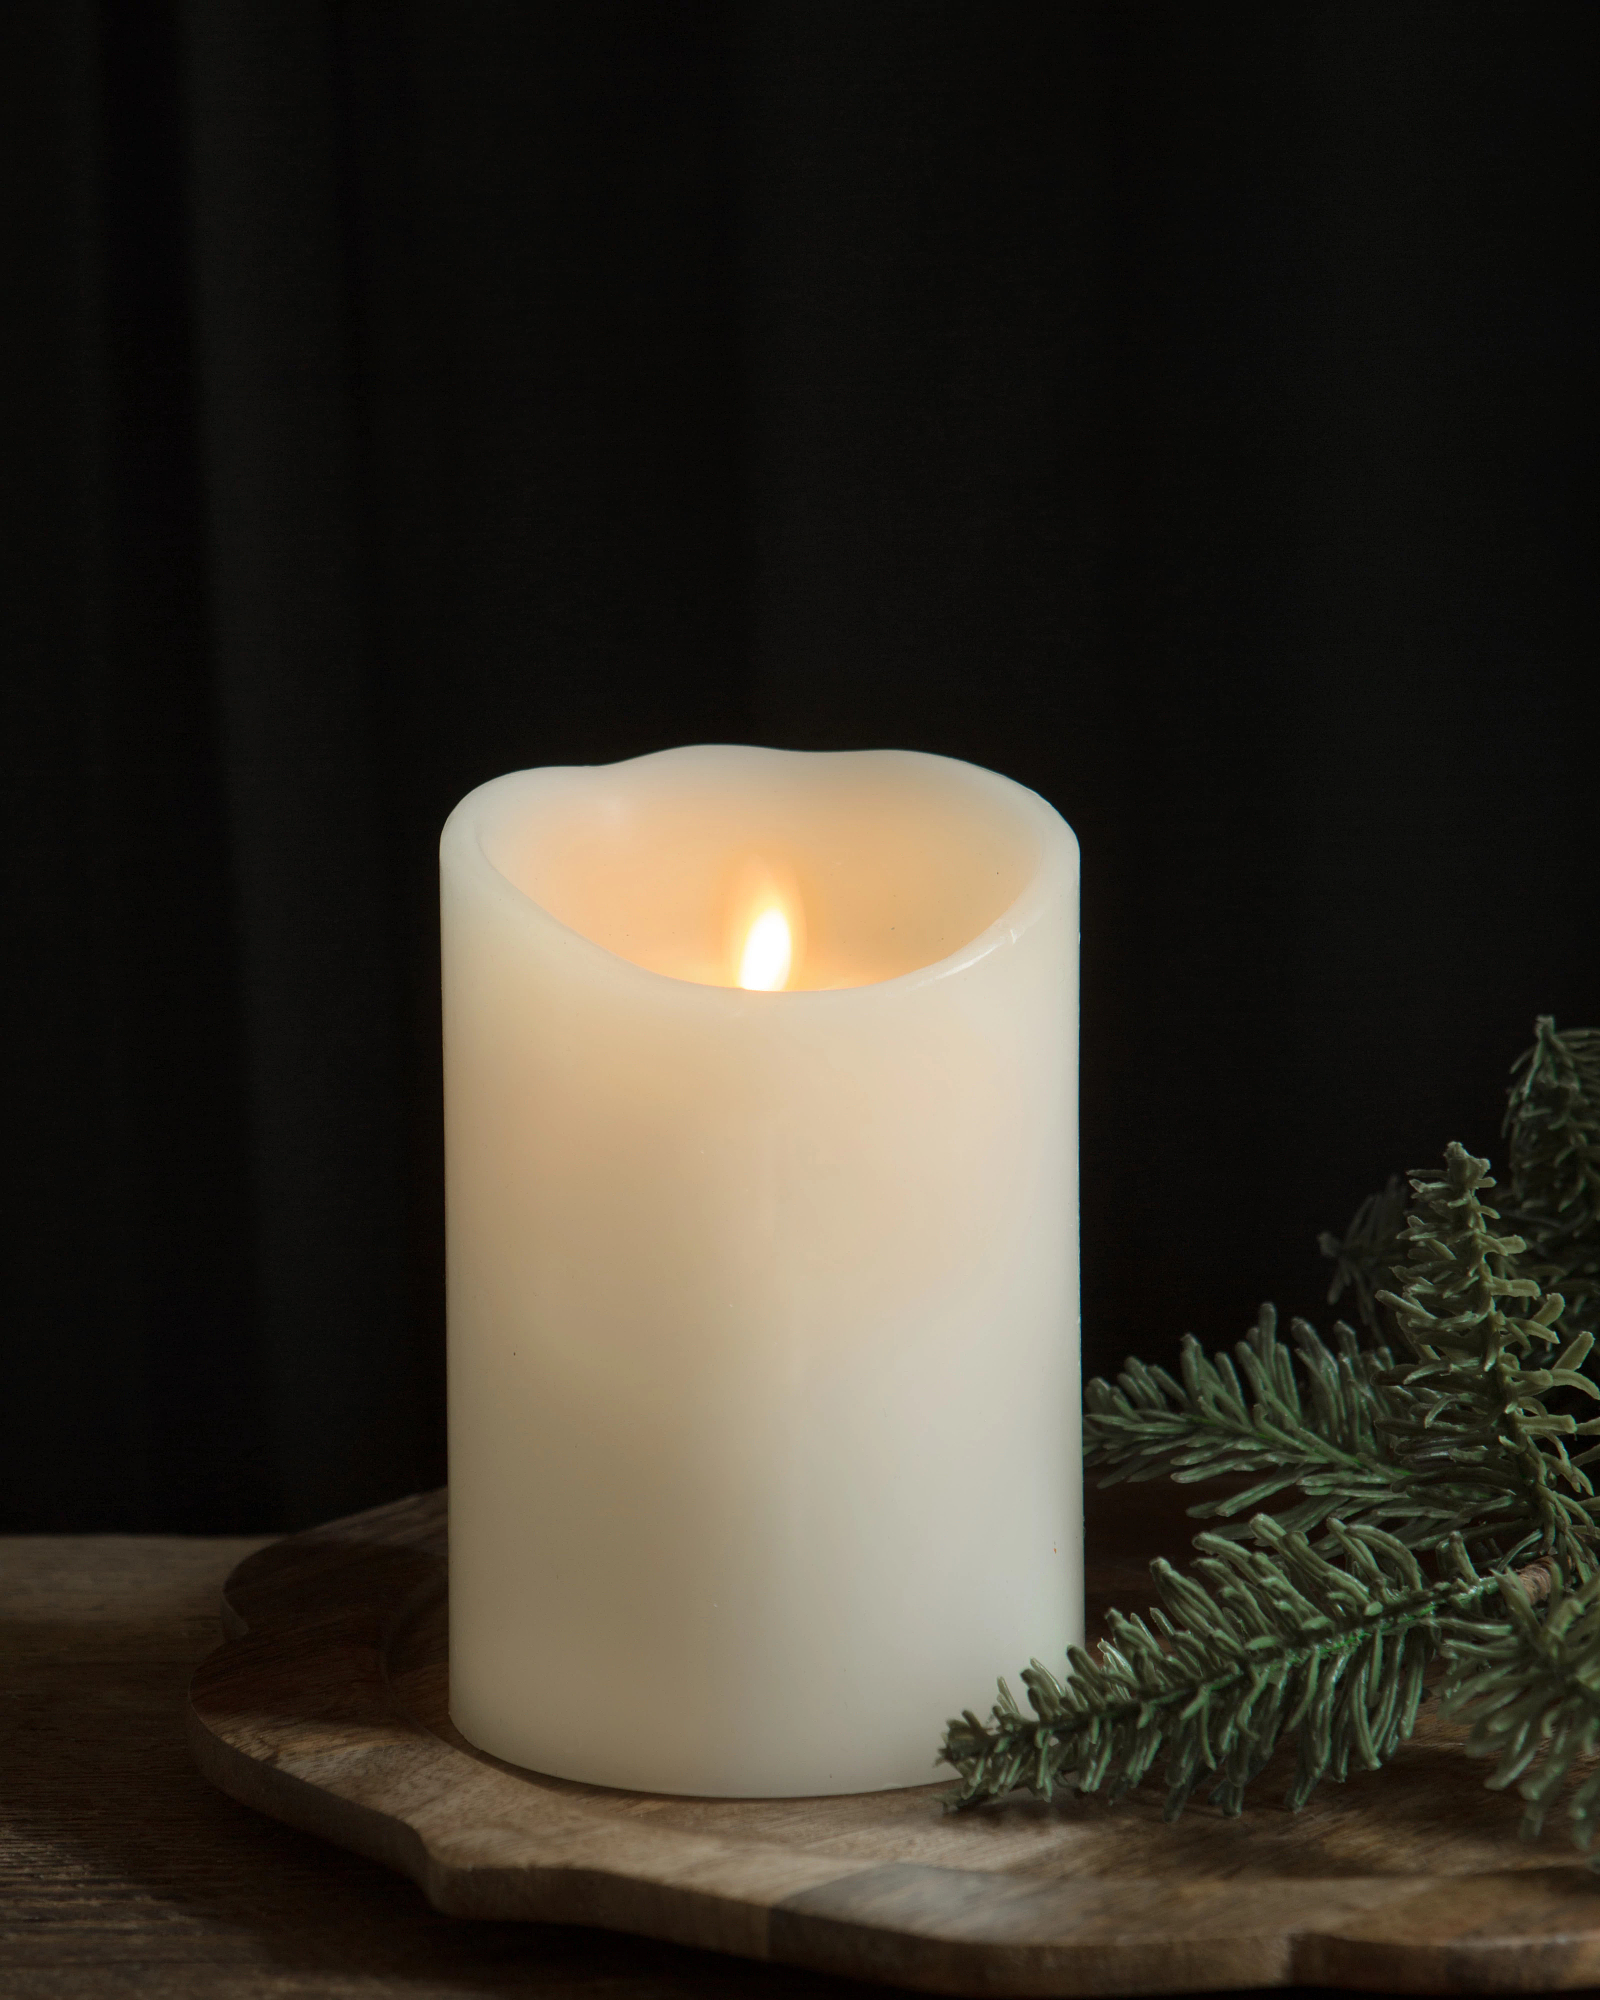 Warm Glow Flameless Scented Electric Hearth Candle